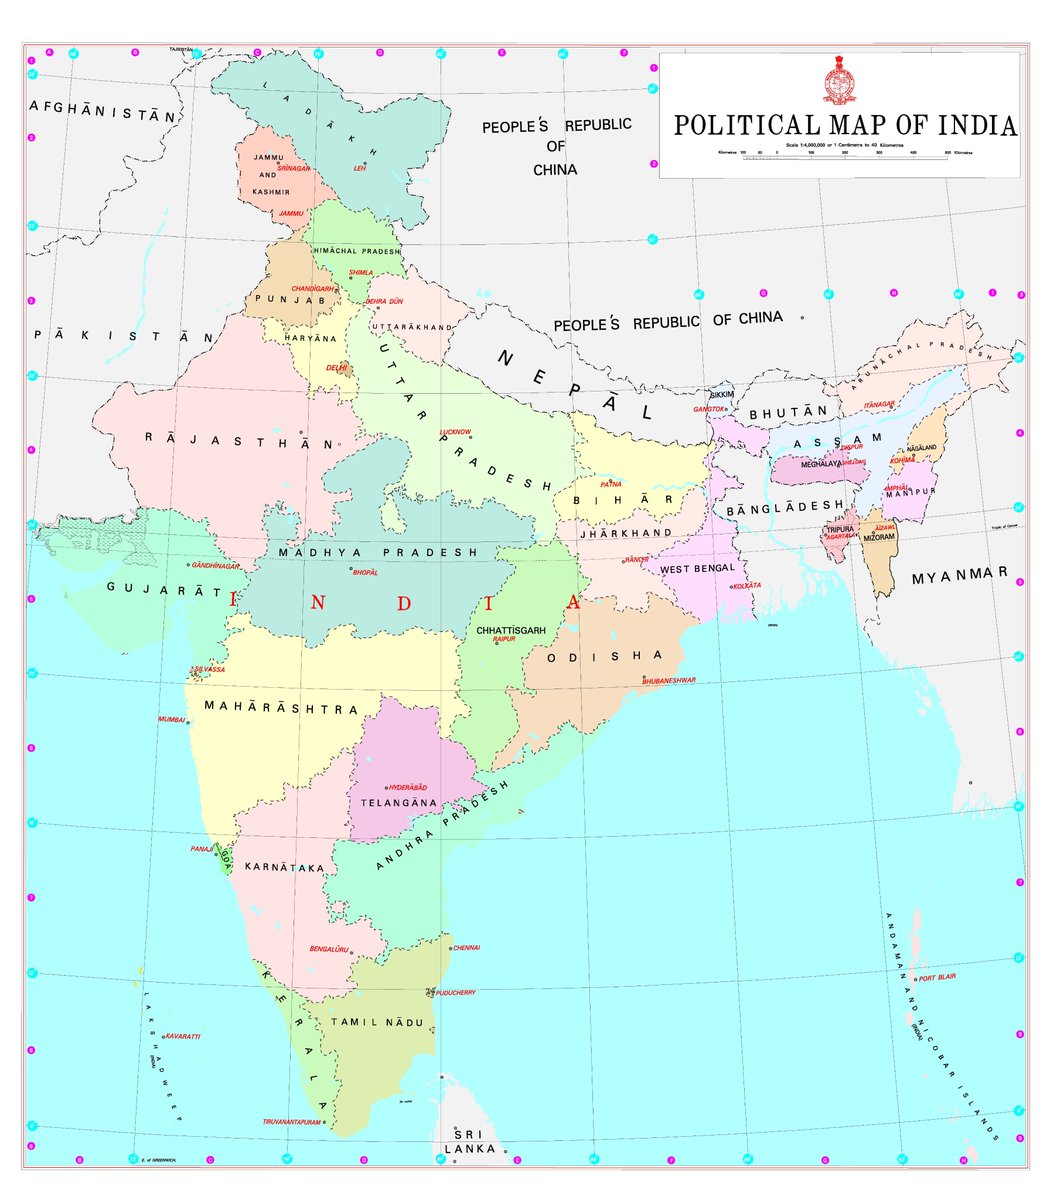 Pib India Maps Of Newly Formed Union Territories Of Jammukashmir And Ladakh With The Map Of India Details T Co Hf1mn9izdo T Co Byopwzwsjf